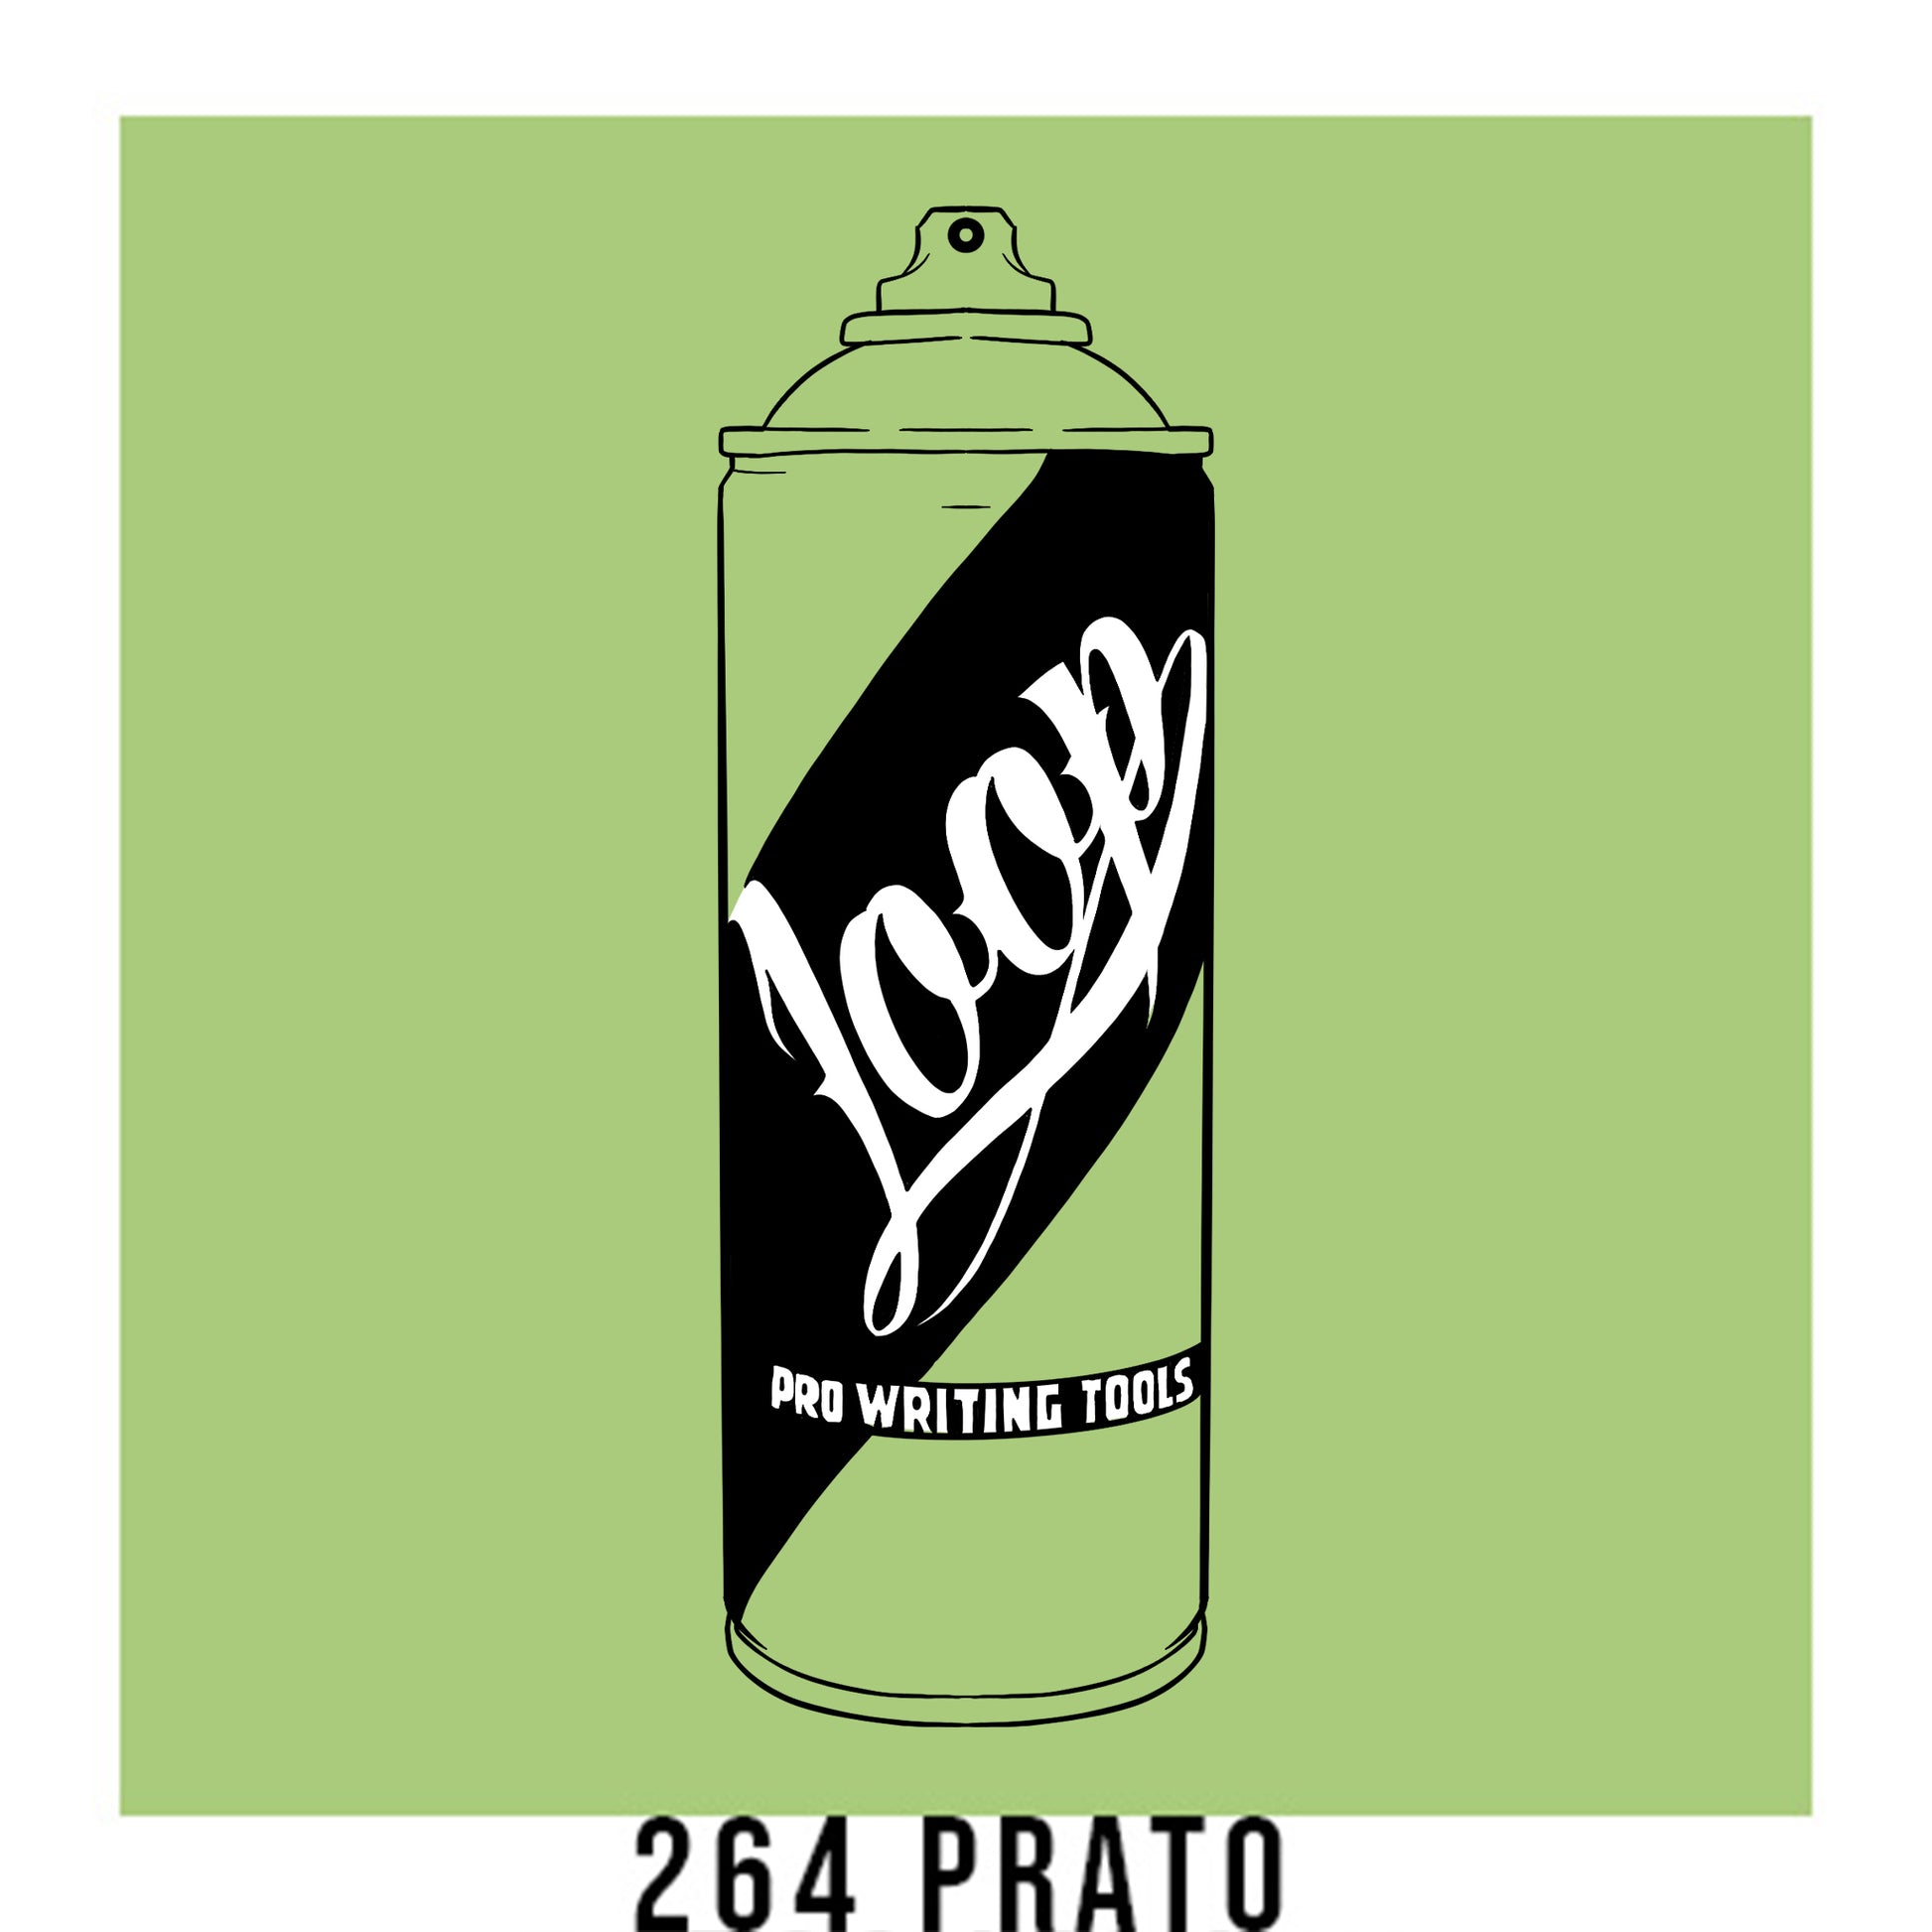 A black outline drawing of a Pastel Green spray paint can with the word "Loop" written on the face in script. The background is a color swatch of the same Pastel Green with a white border with the words "264 Prato" at the bottom.